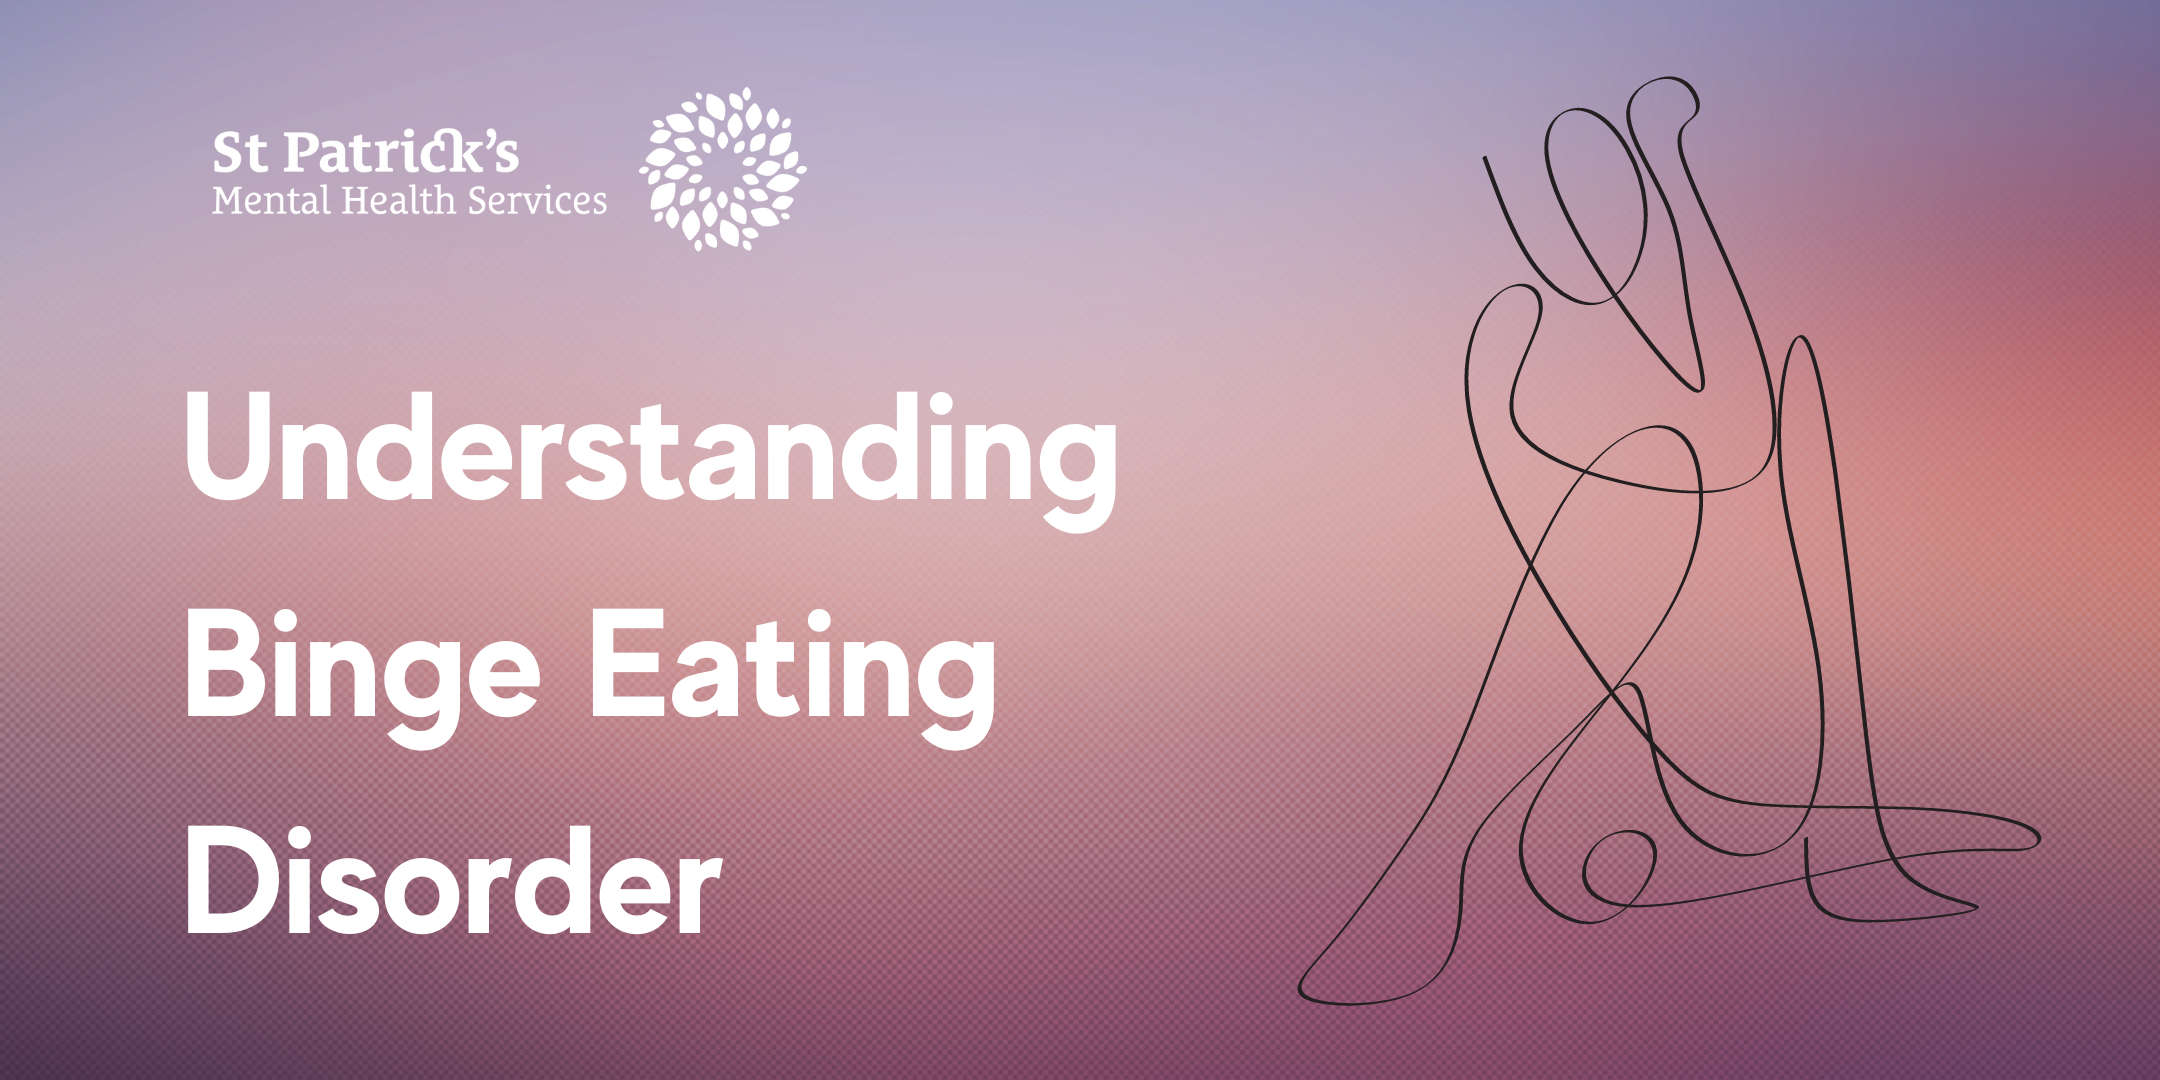 Outline of a person contemplating their relationship to food and their body, representing a person dealing with binge eating disorder